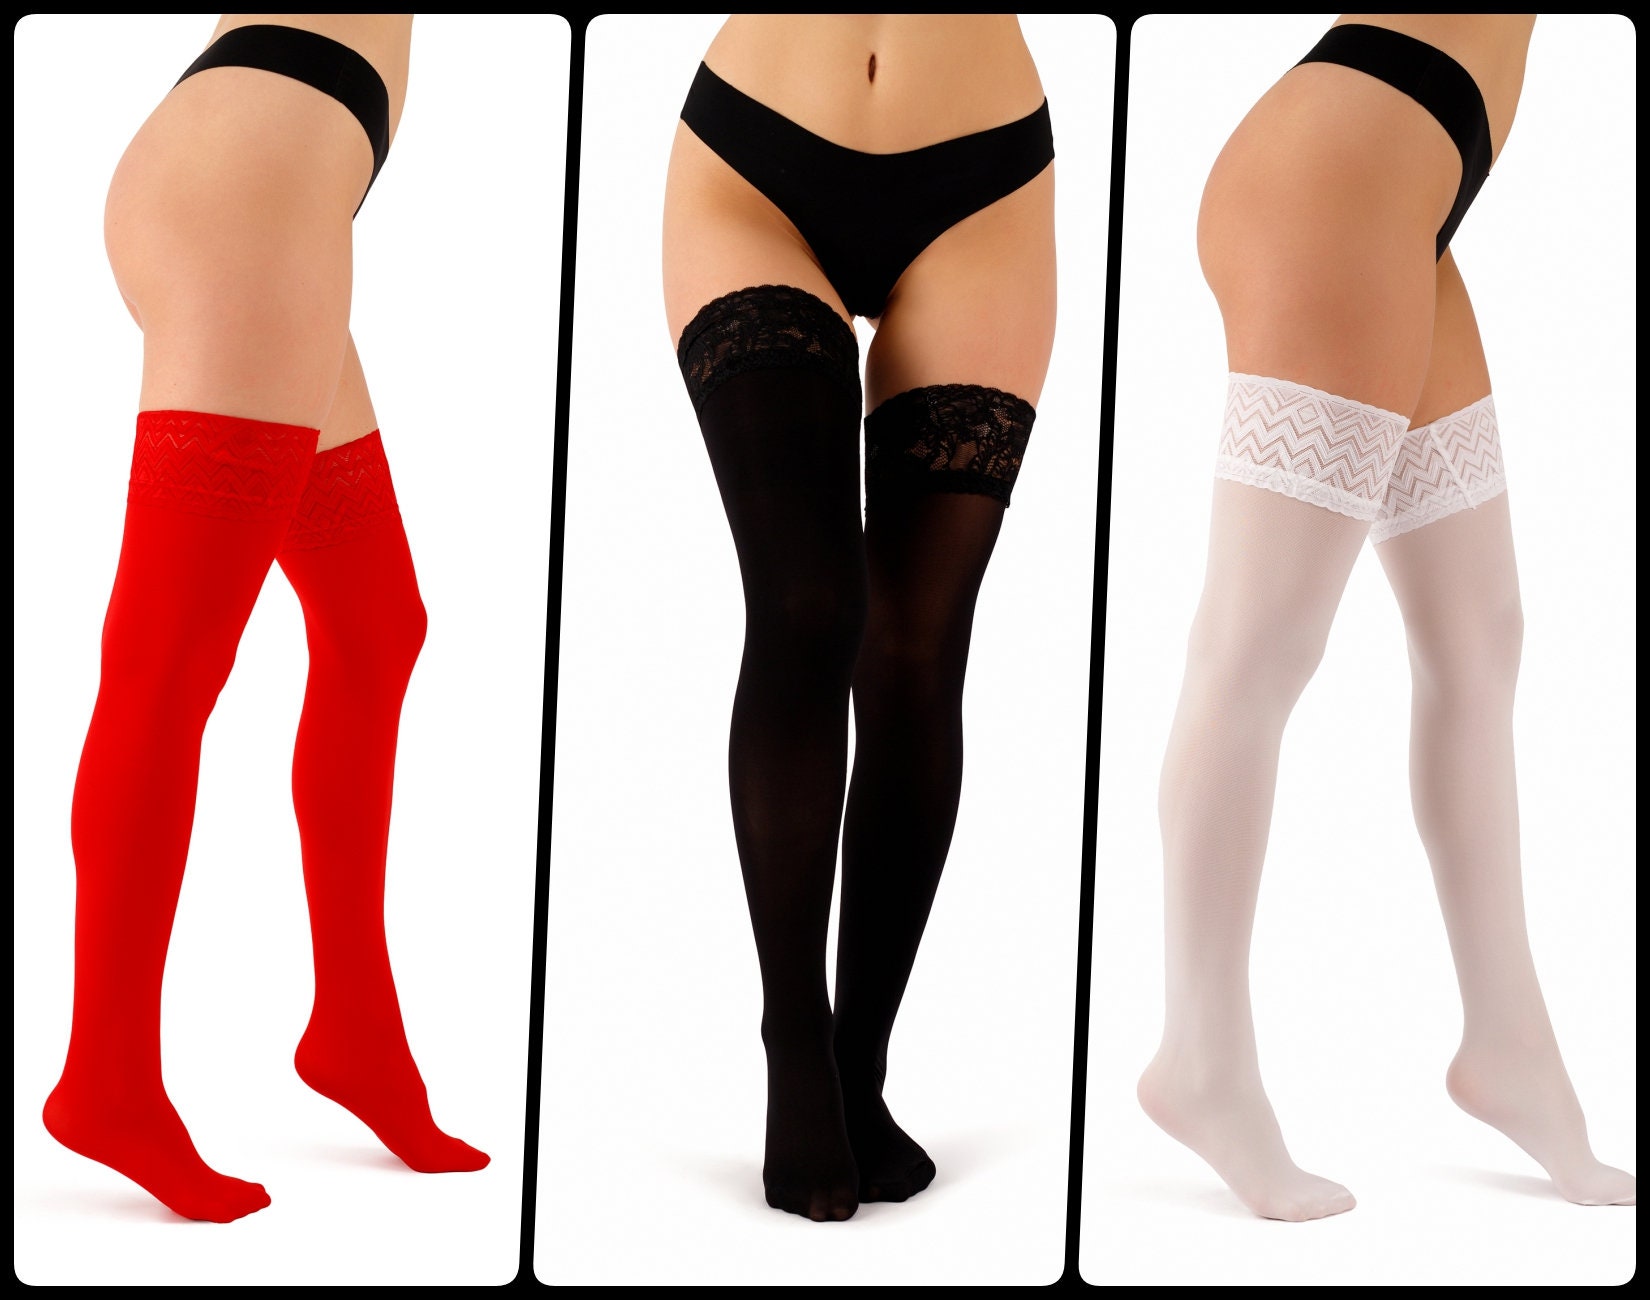 Opaque, Self-supporting Women's Stockings 60 Denier With Silicone